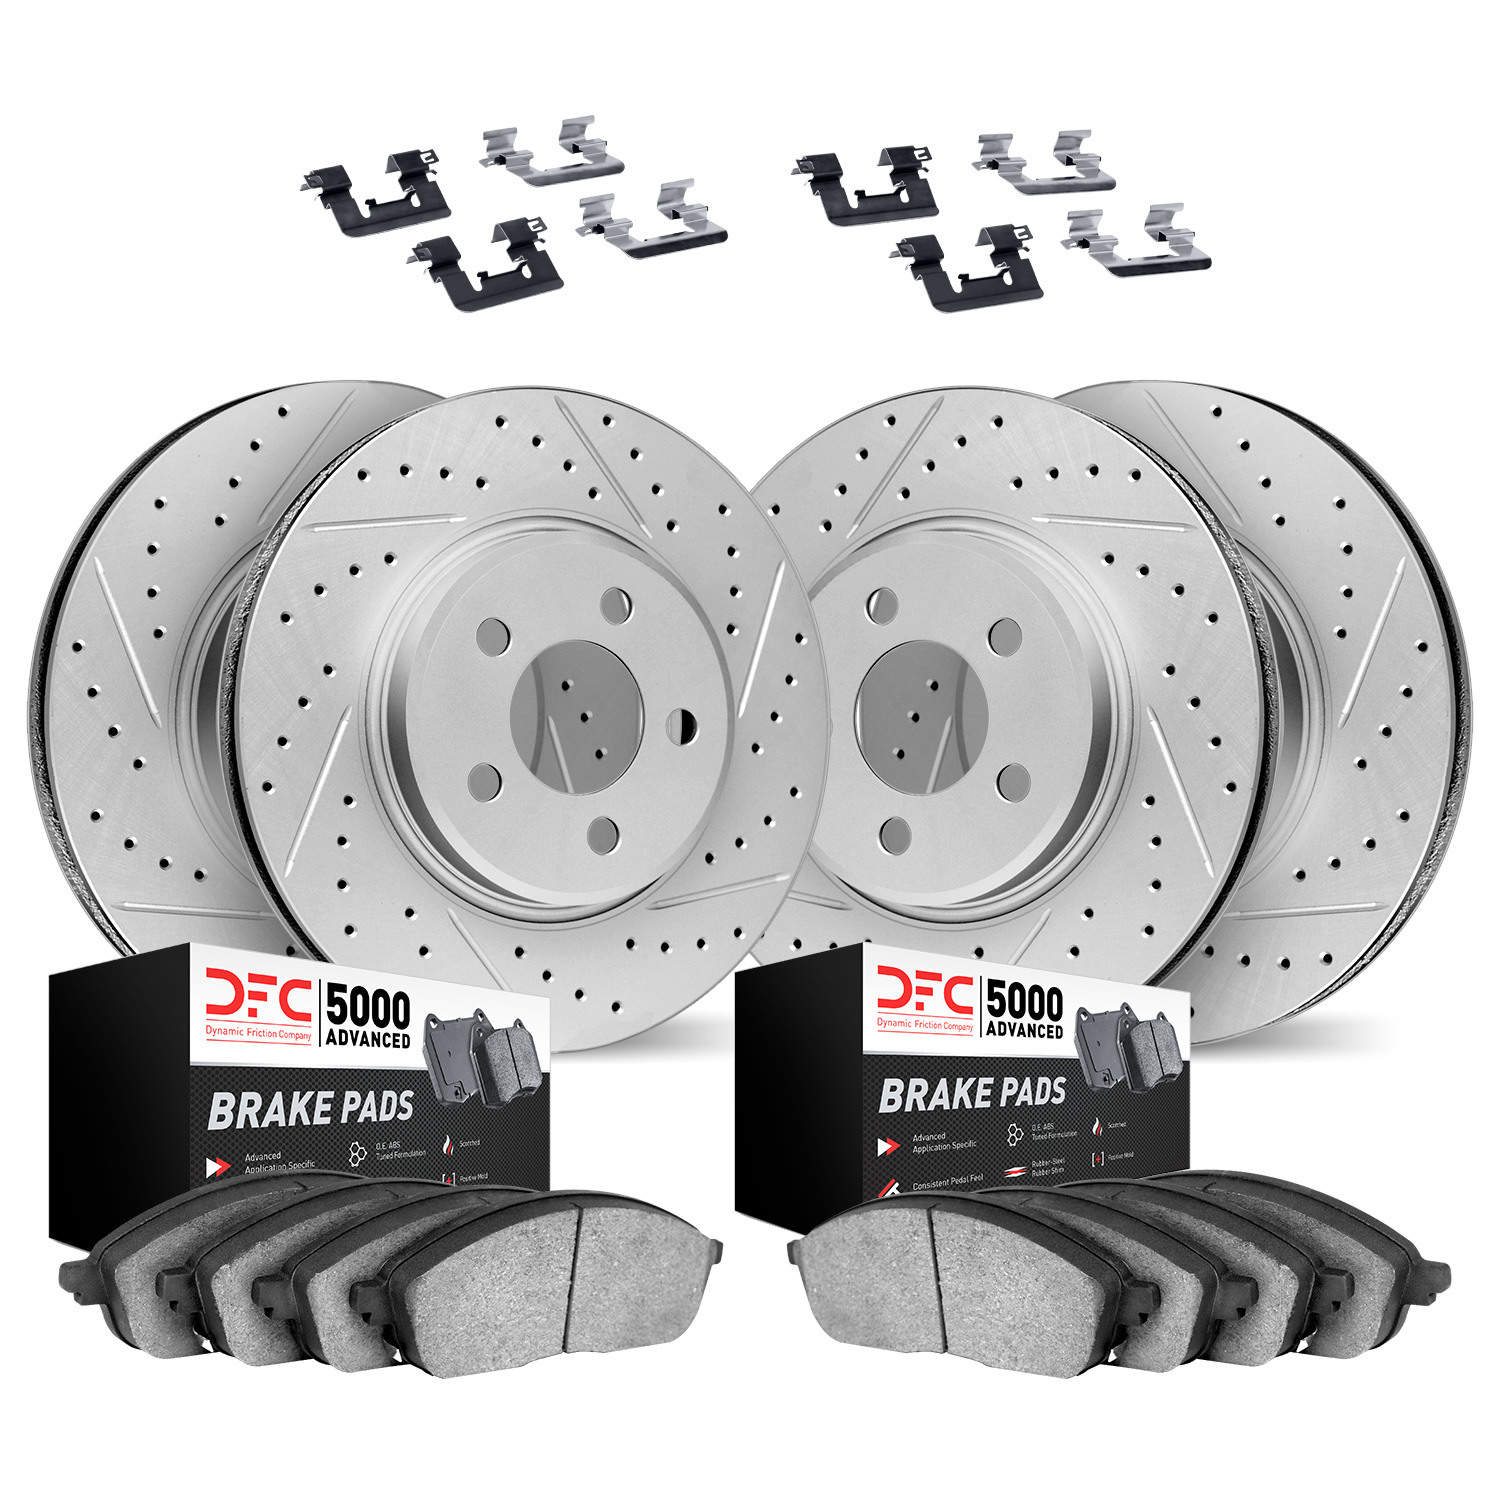 2514-31007 Geoperformance Drilled/Slotted Rotors w/5000 Advanced Brake Pads Kit & Hardware, 2004-2007 BMW, Position: Front and R